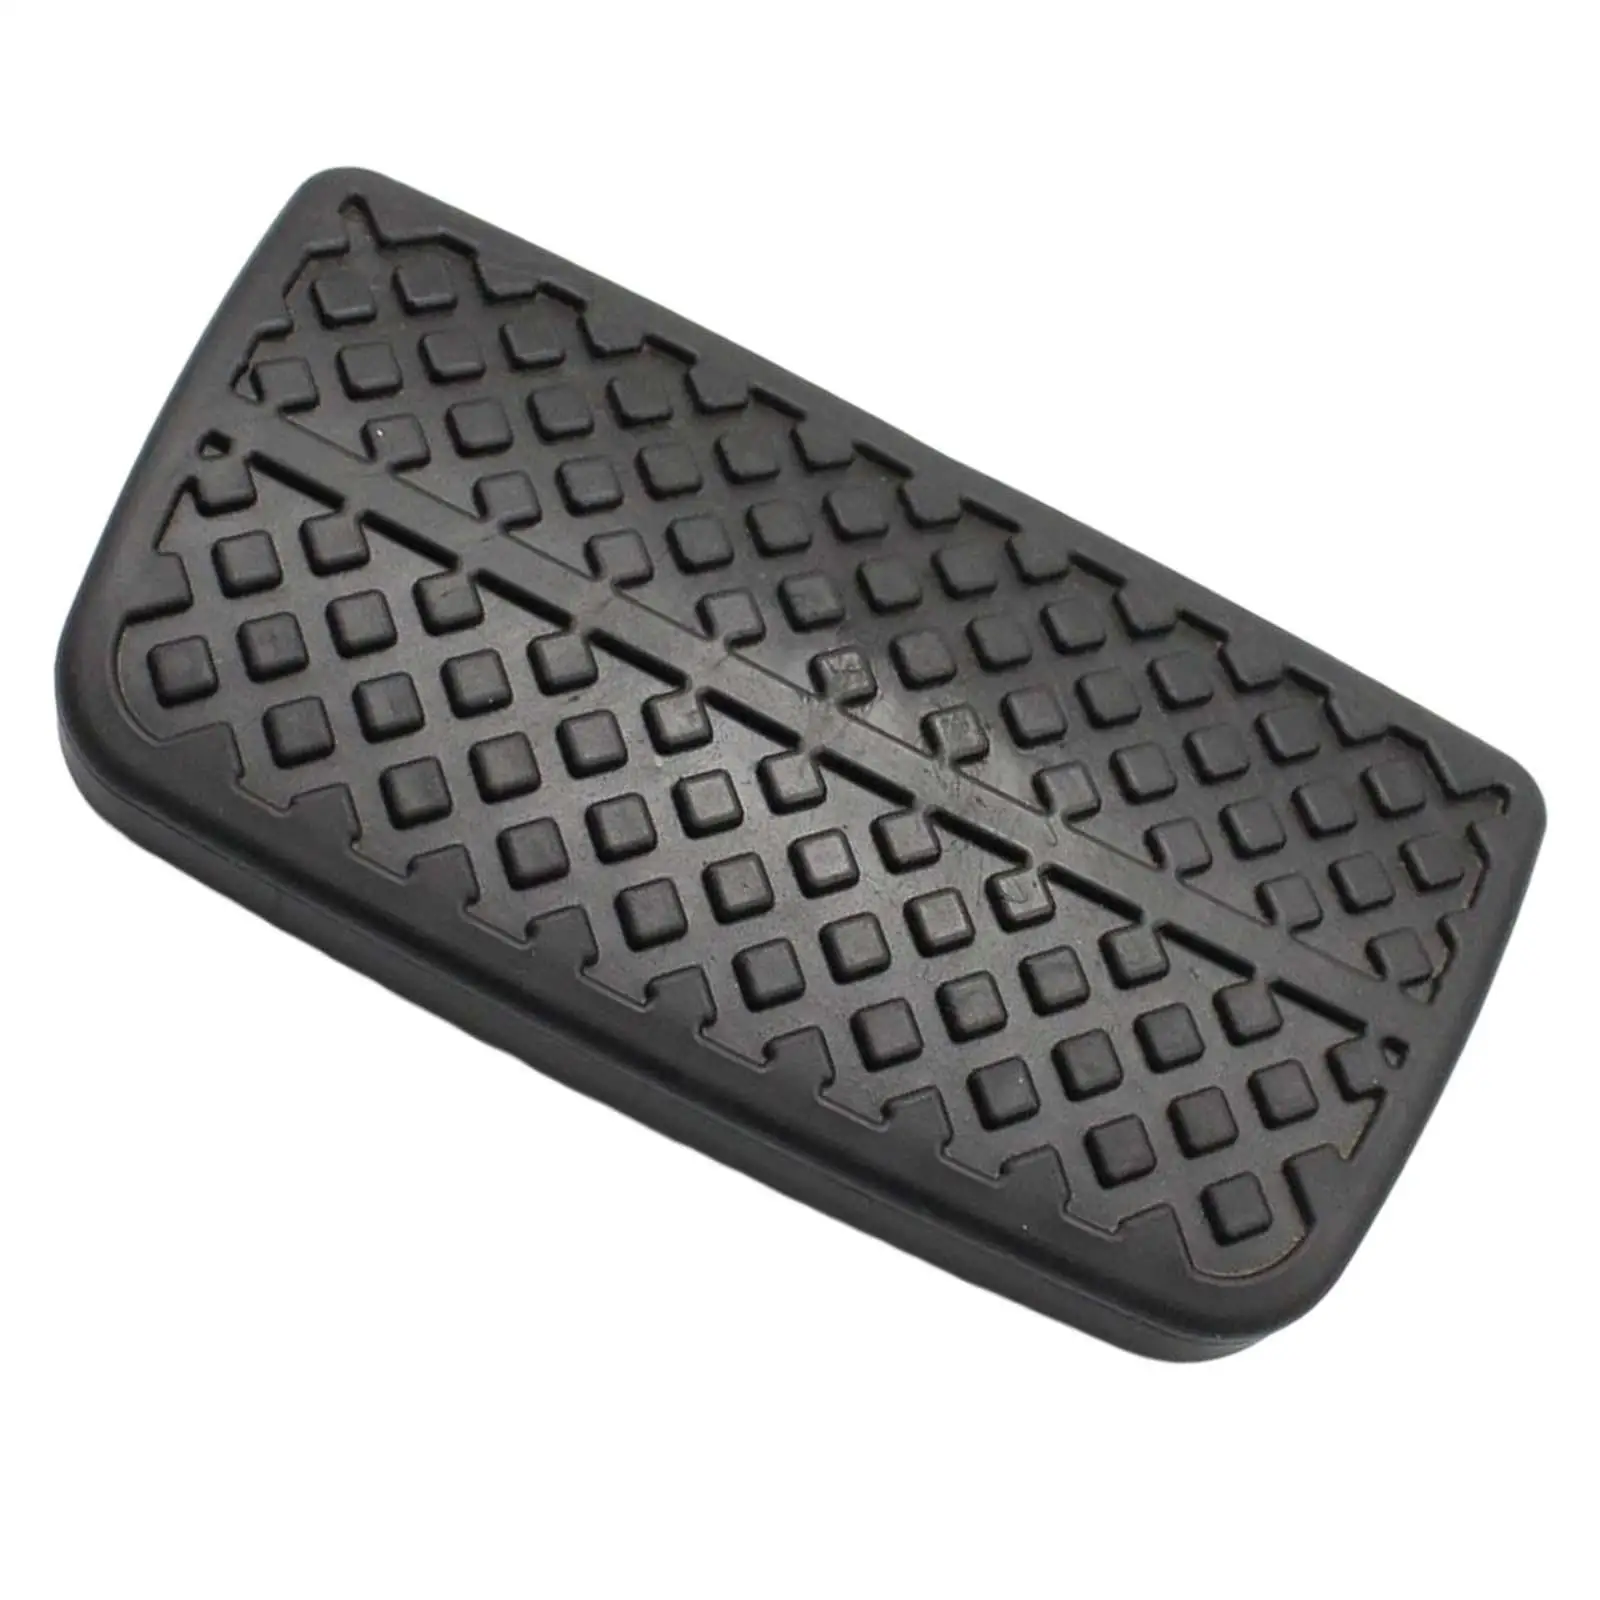 Car Rubber Brake Pedal Cover 46545-s1F-981 replacements for Honda Fit Jazz